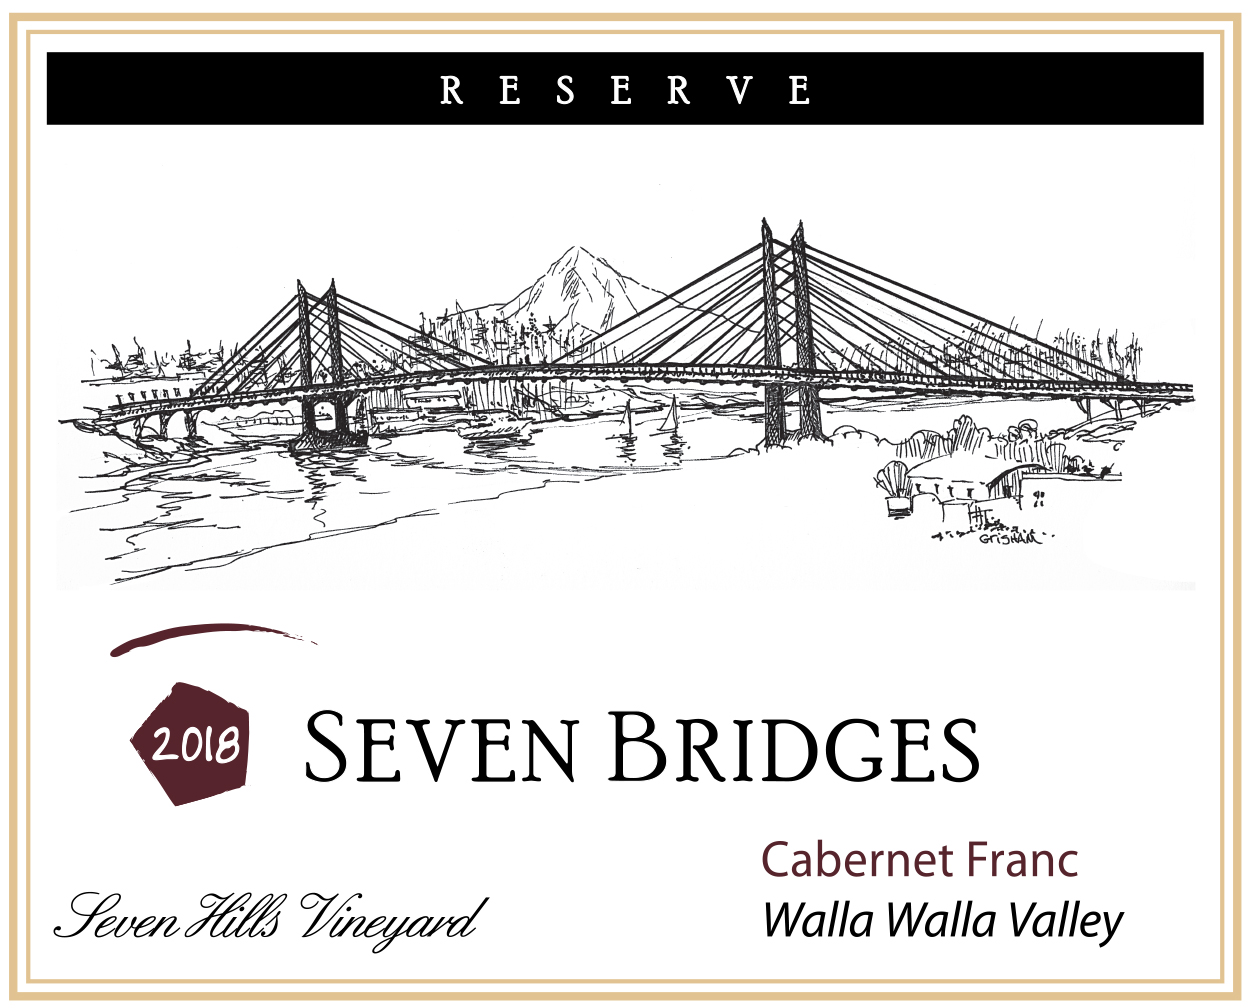 Product Image for 2018 Cab Franc Reserve